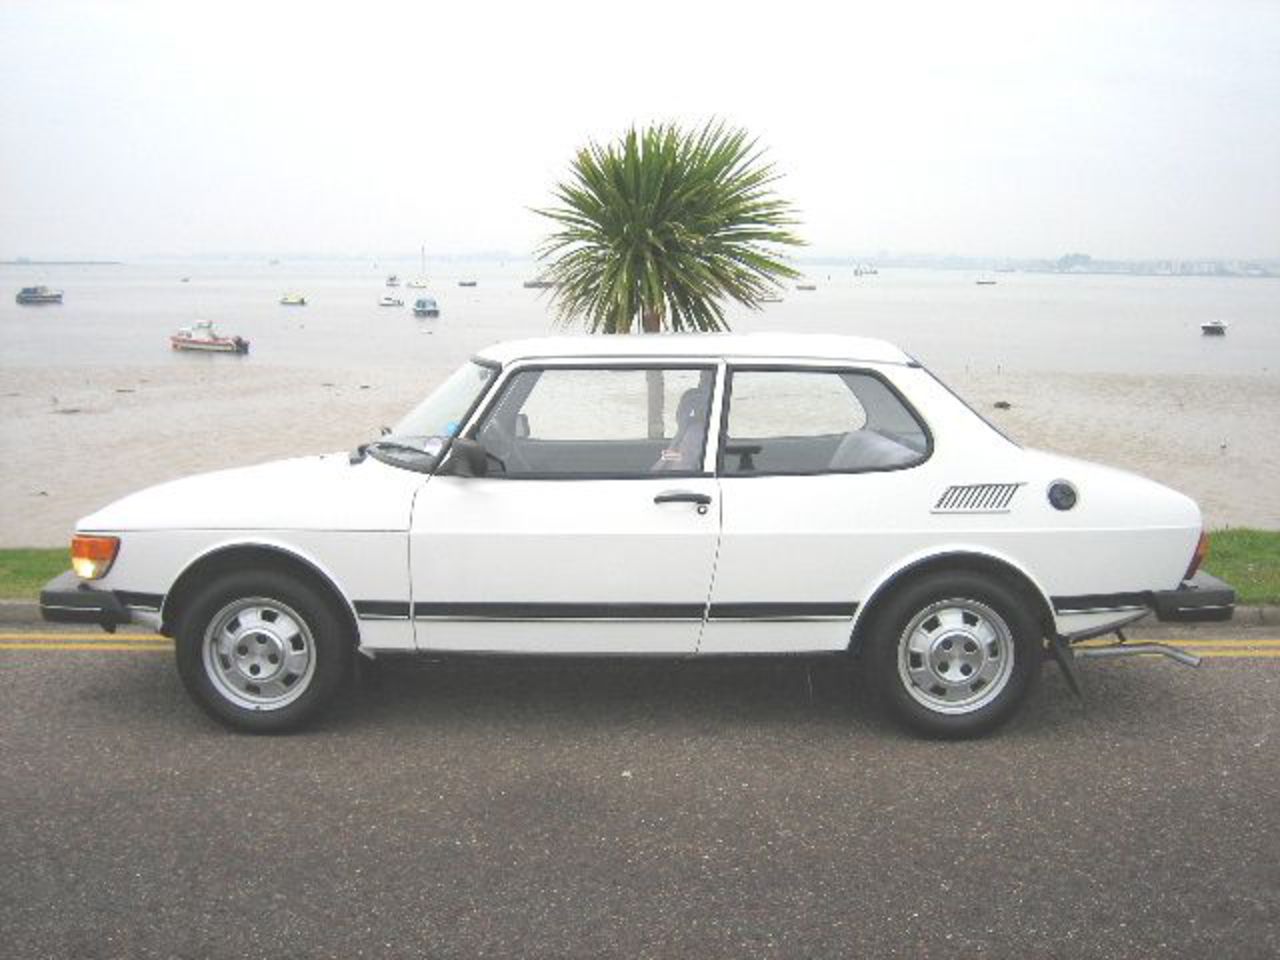 Black & White Cars, Bournemouth - Classic and Performance Cars ...